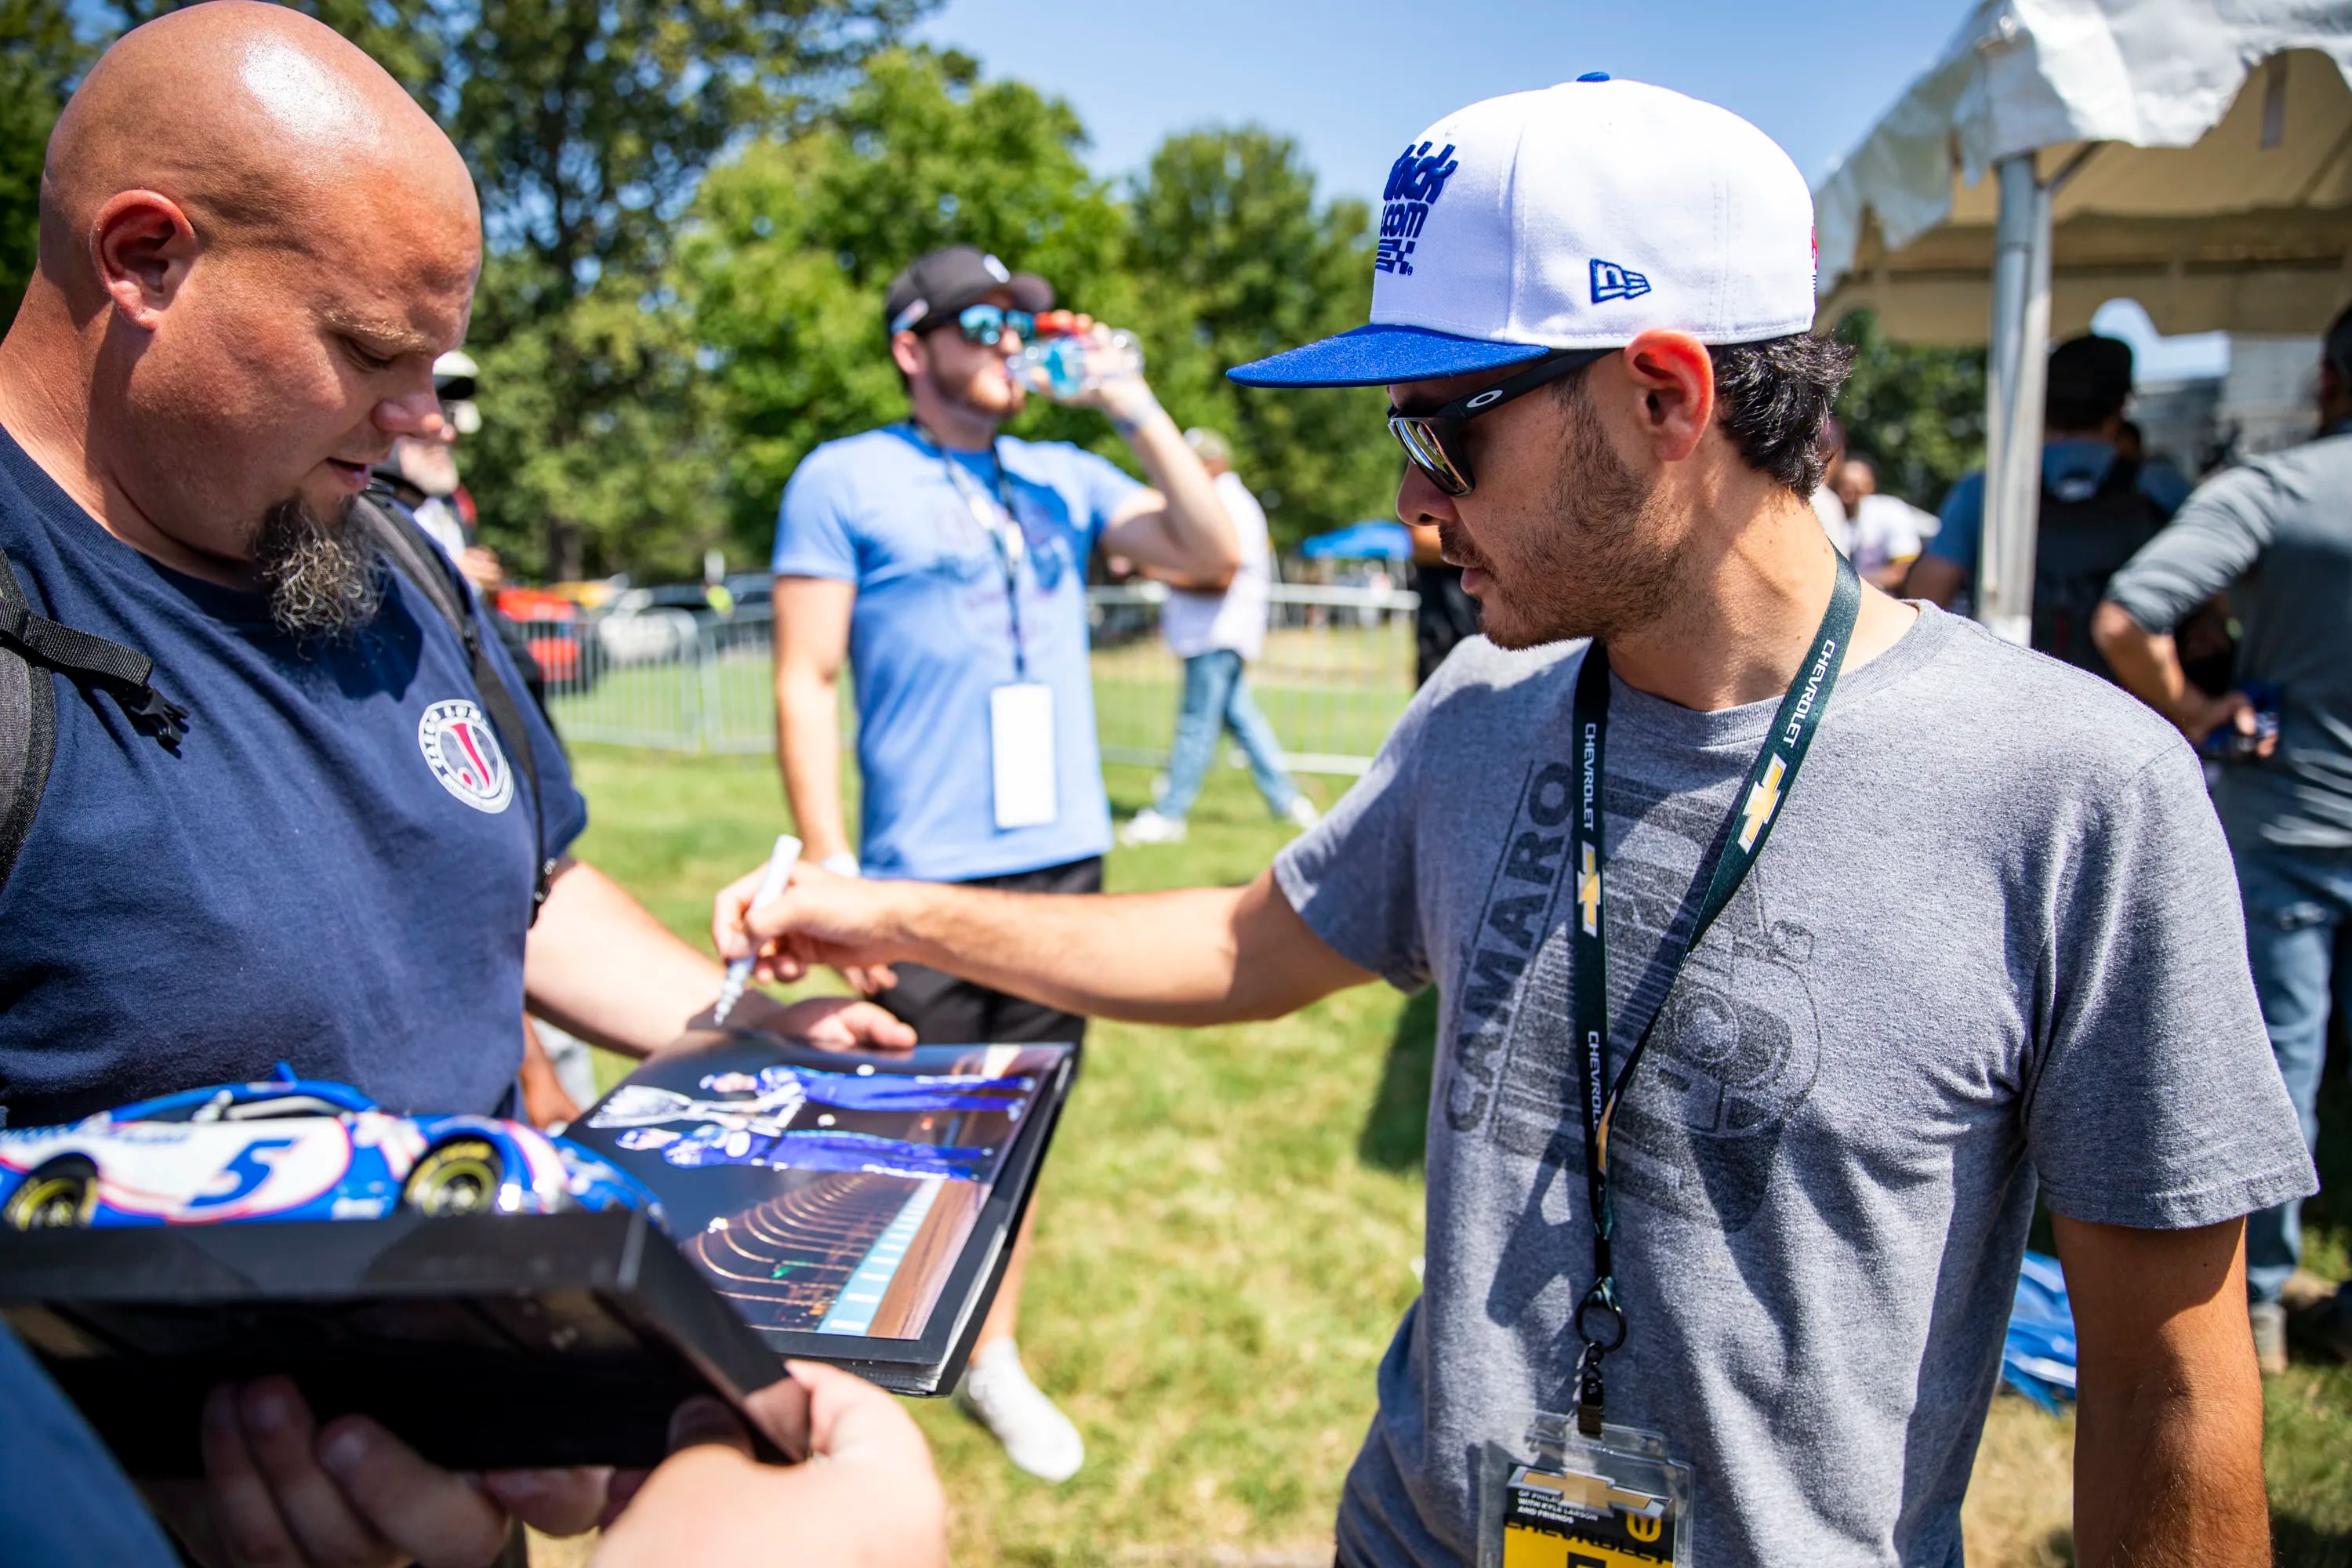 NASCAR Cup Series Champion Kyle Larson signs a fans photo and many other signatures during the Urban Youth Racing School event in front of the Please Touch Museum in Philadelphia on Friday.

